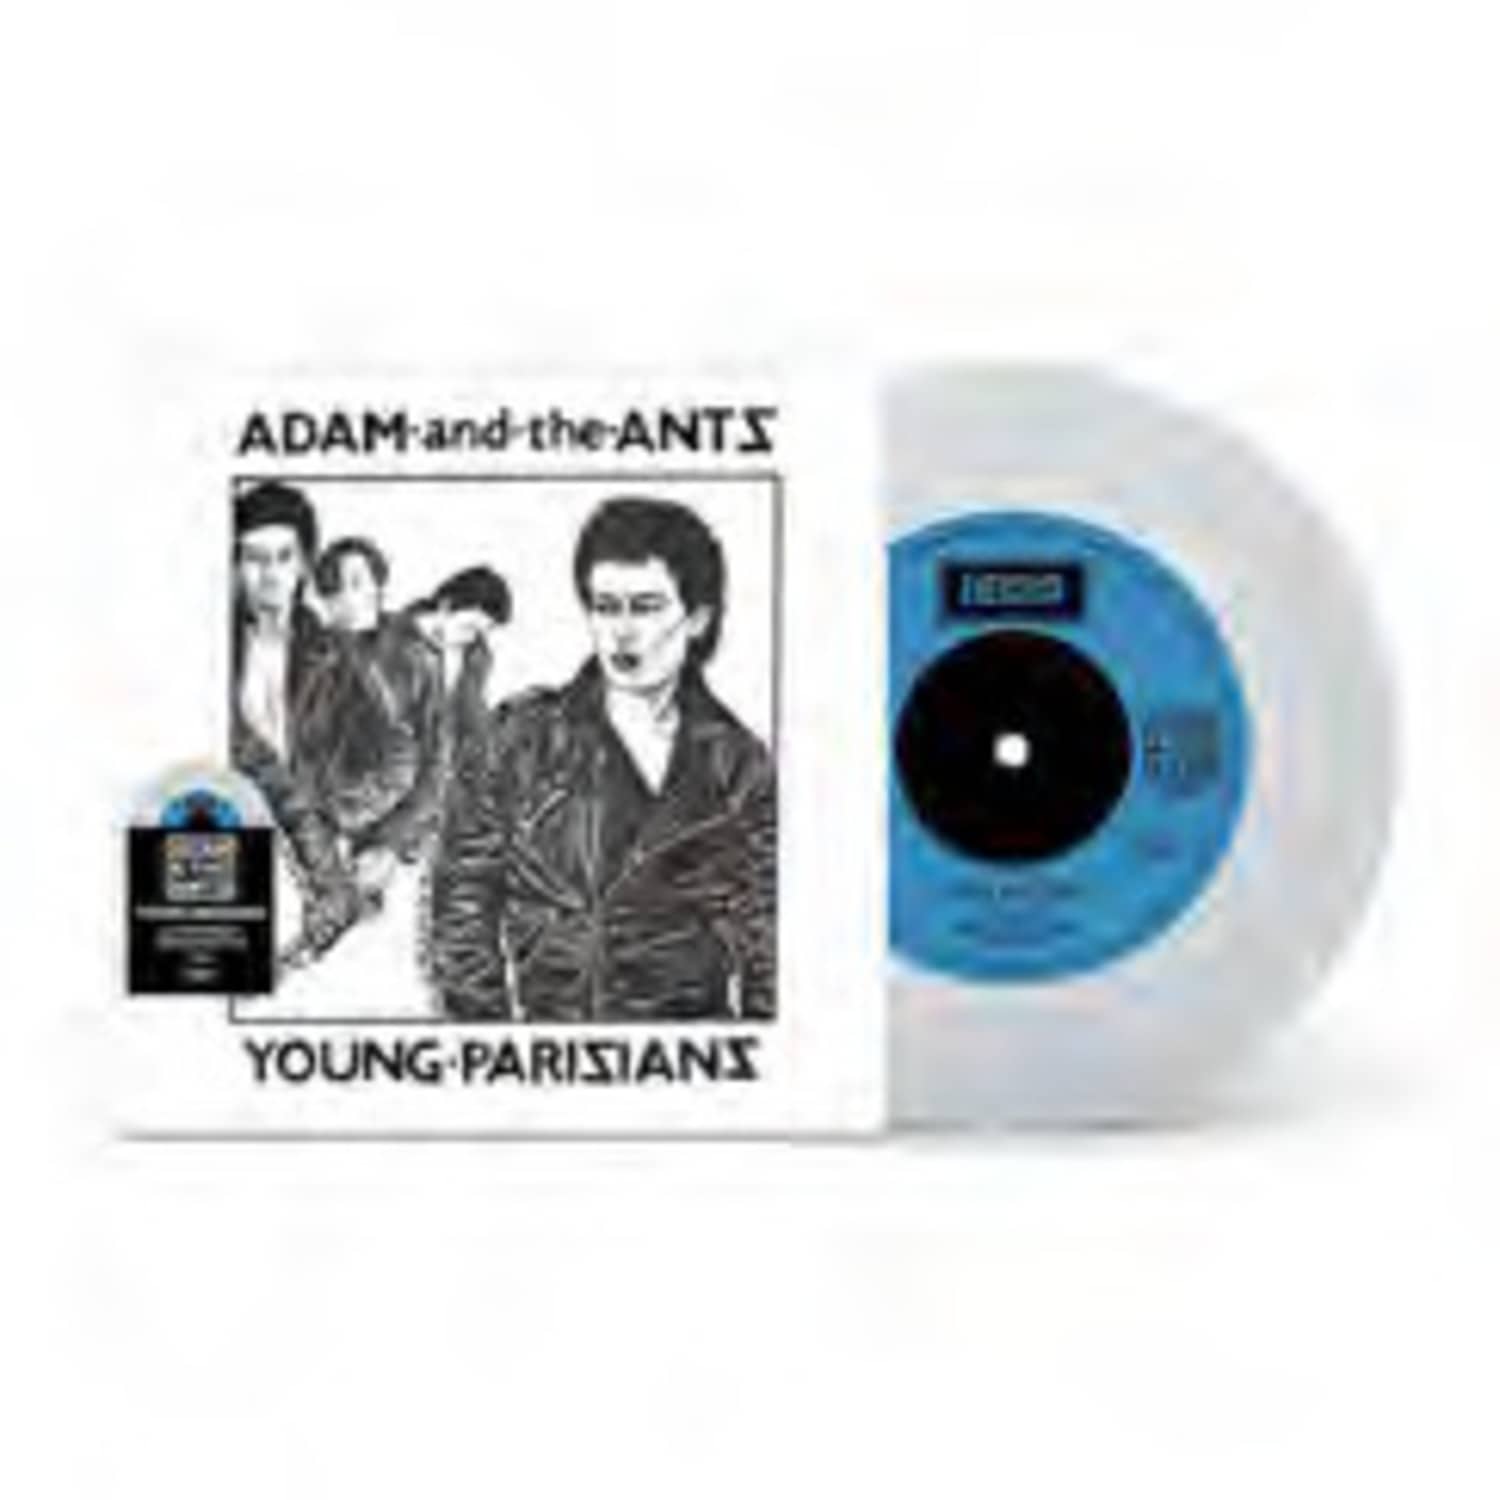 Adam & the Ants - YOUNG PARISIANS / LADY 